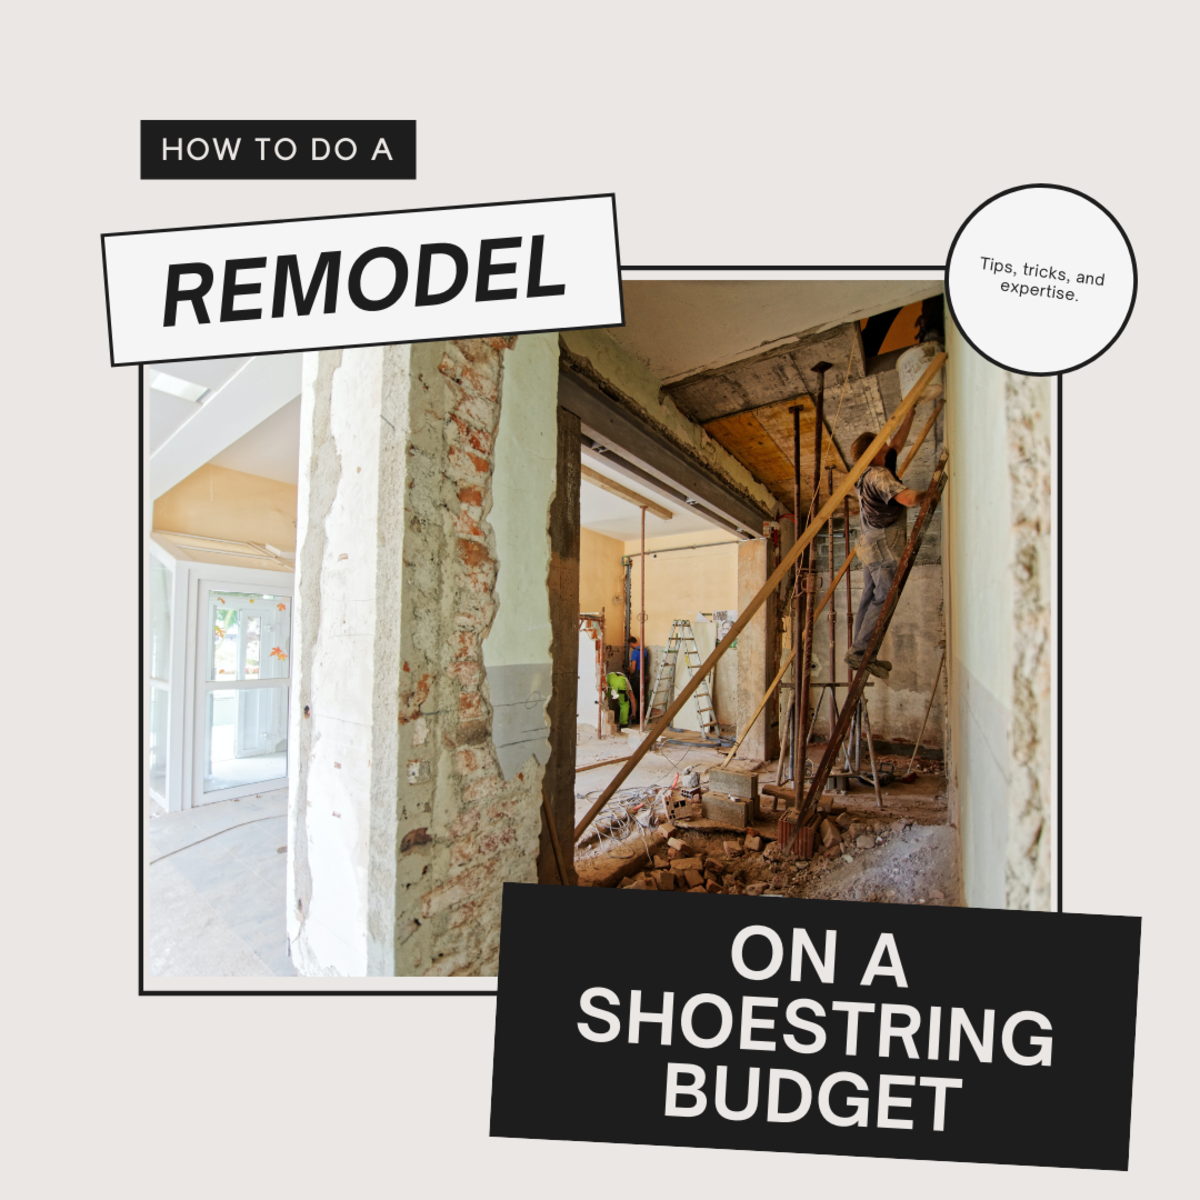 How to Remodel a Home on a Shoestring Budget